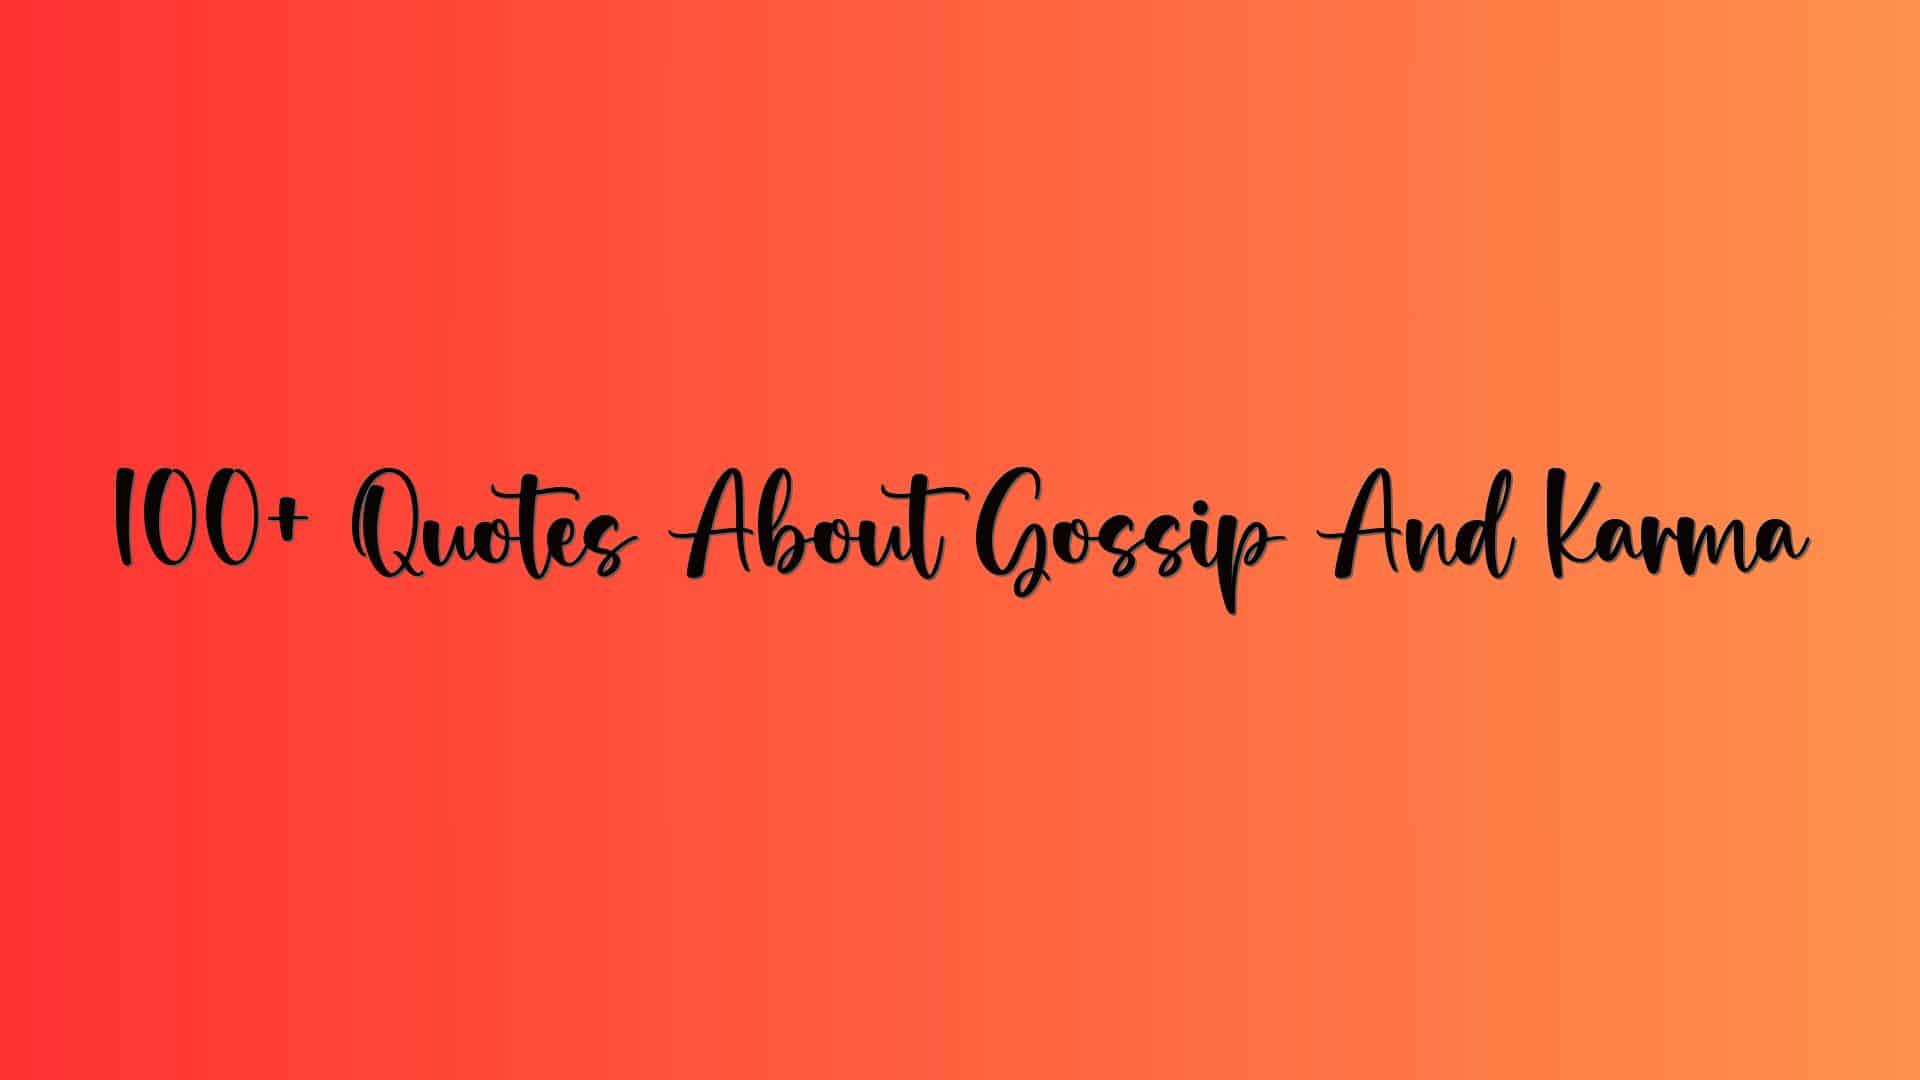 100+ Quotes About Gossip And Karma